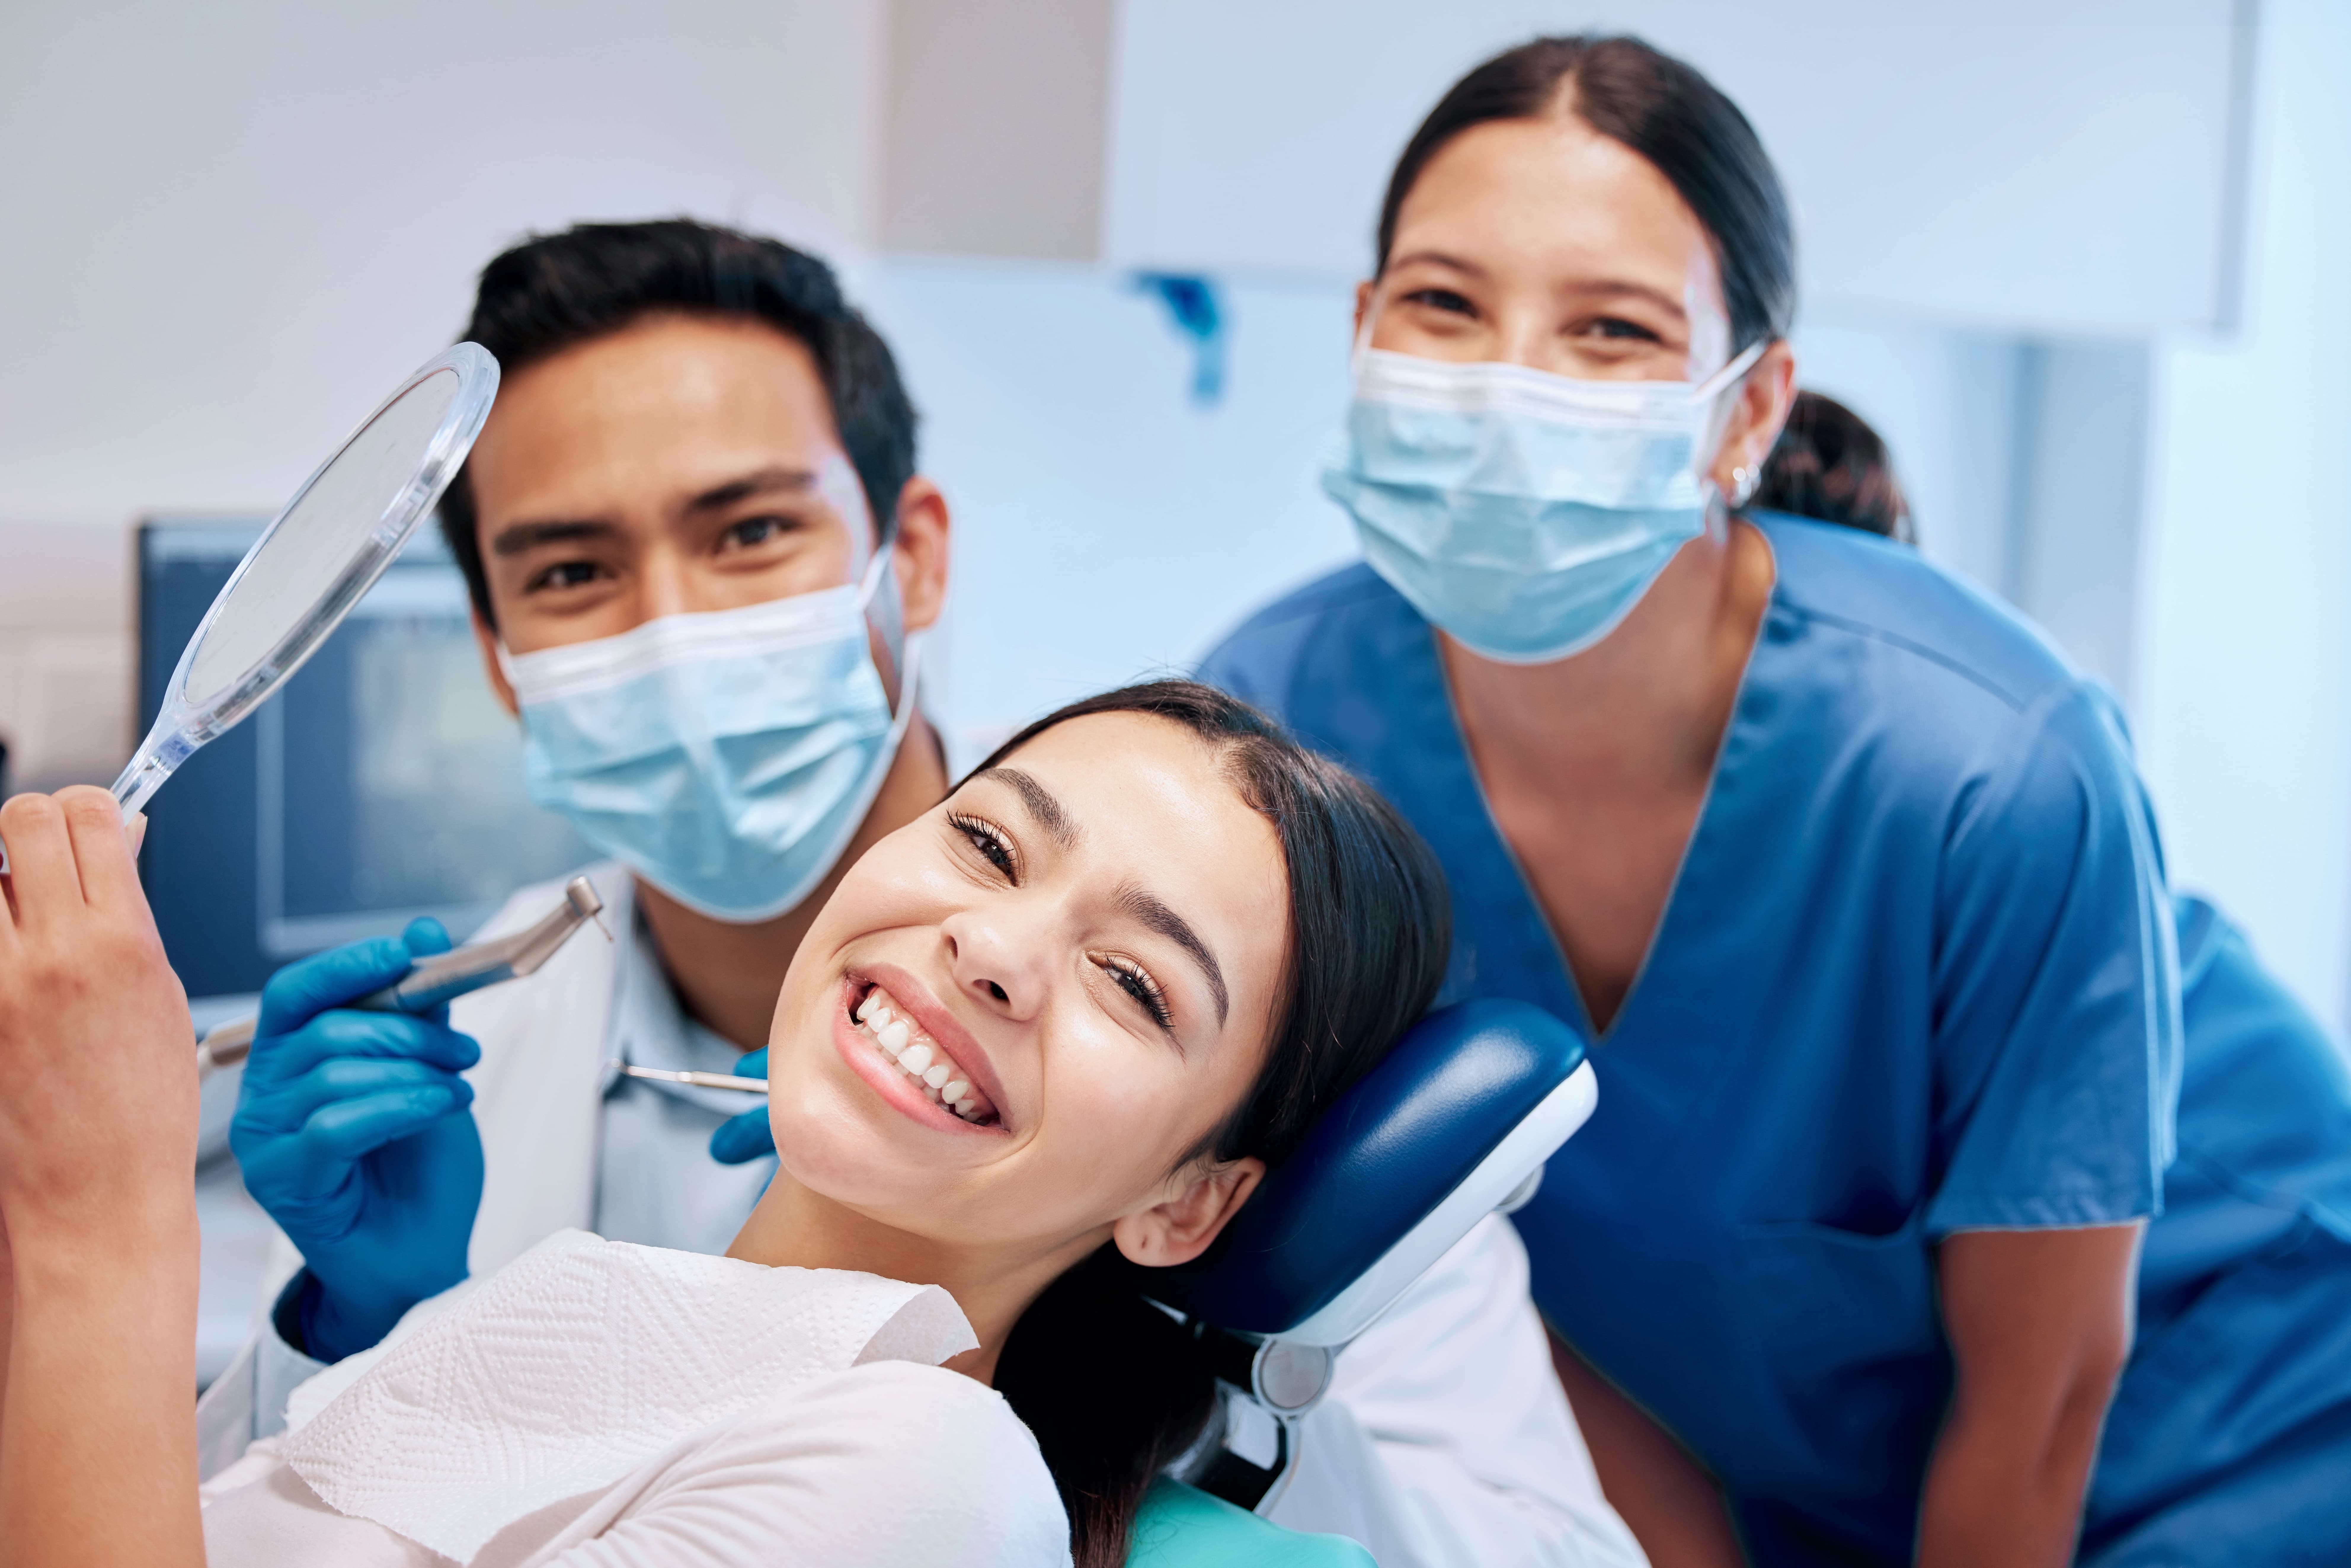 A girl on a dentist chair smiles at the camera. Behind her, a male dentist and female dental hygienist smile while wearing blue masks.